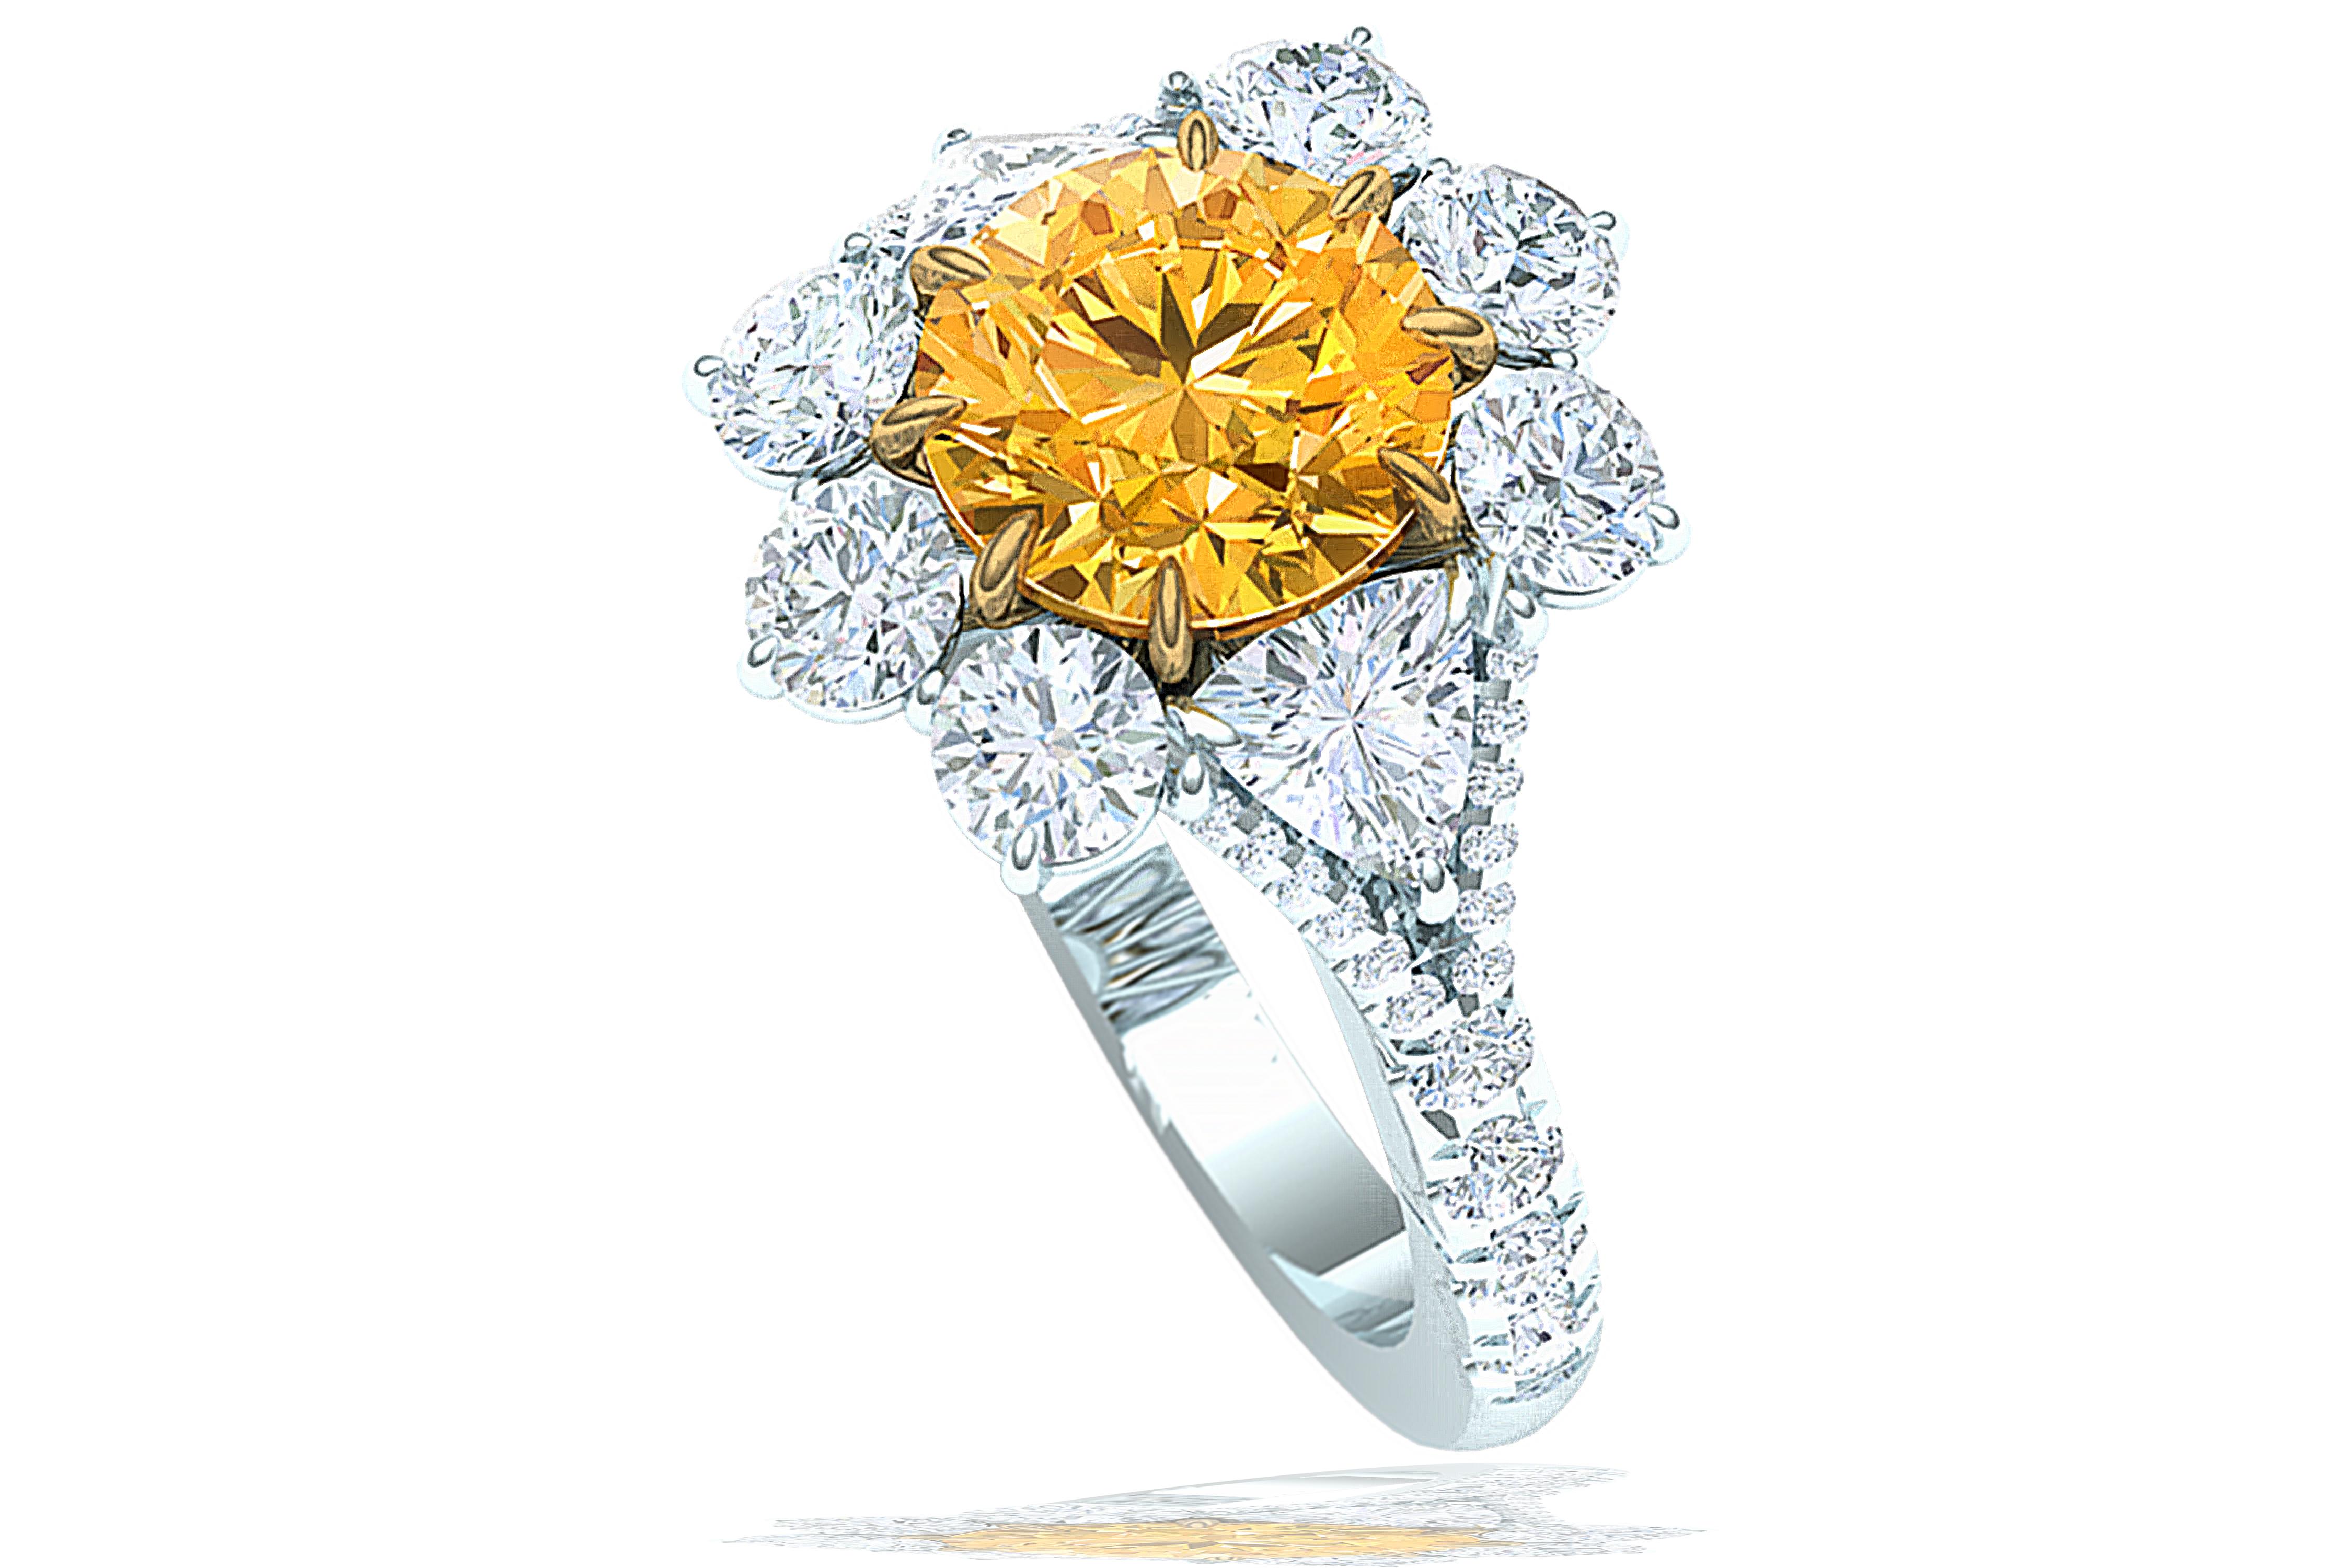 A rare and stunning bright orange yellow diamond ring can be seen here.  The center is a GIA Certified Round Brilliant which has a color of Fancy Orange Yellow Diamond and SI2 clarity.  The center diamond has no visible inclusions with the naked eye